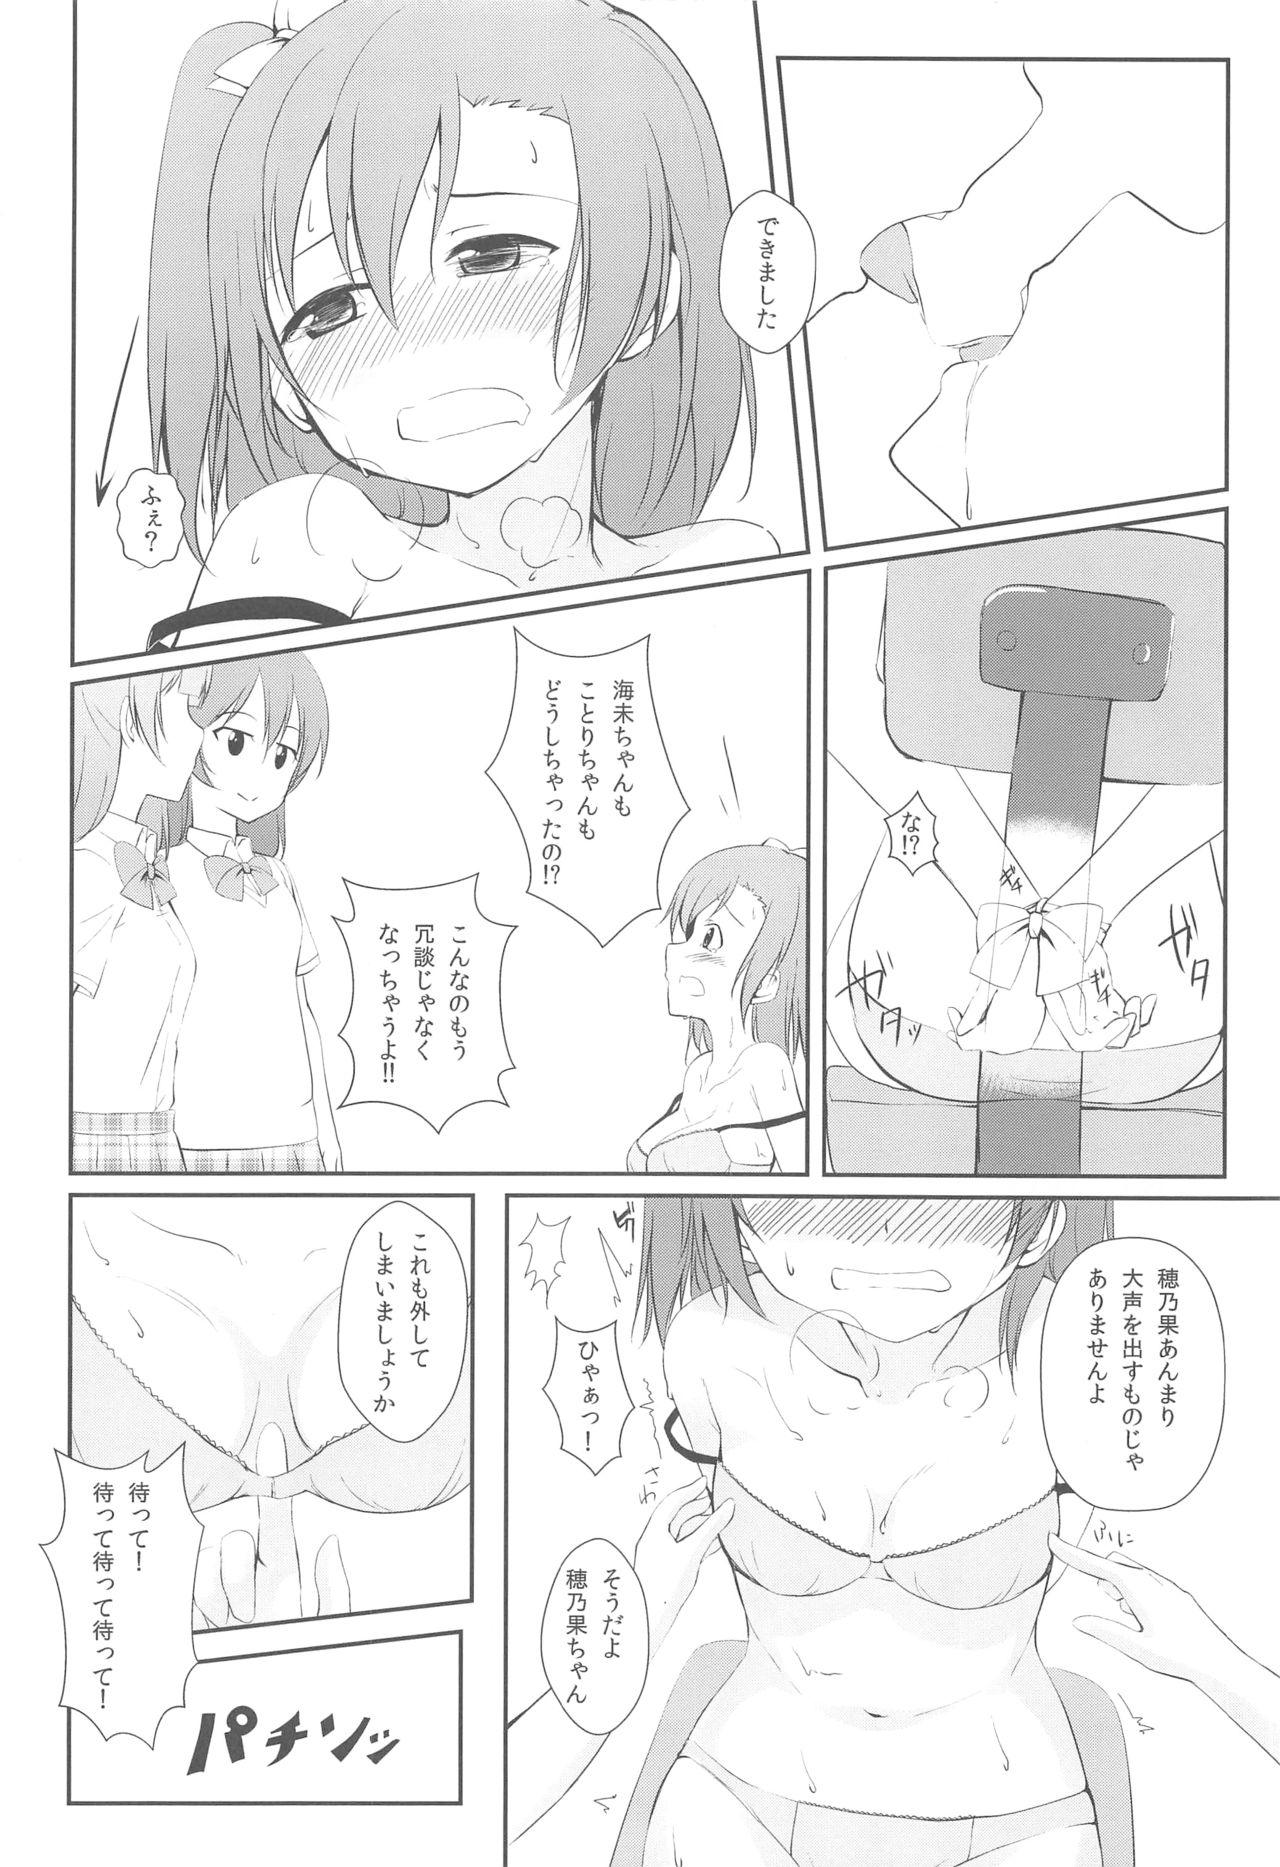 3some UNBALANCED LOVE. - Love live Outdoor - Page 11